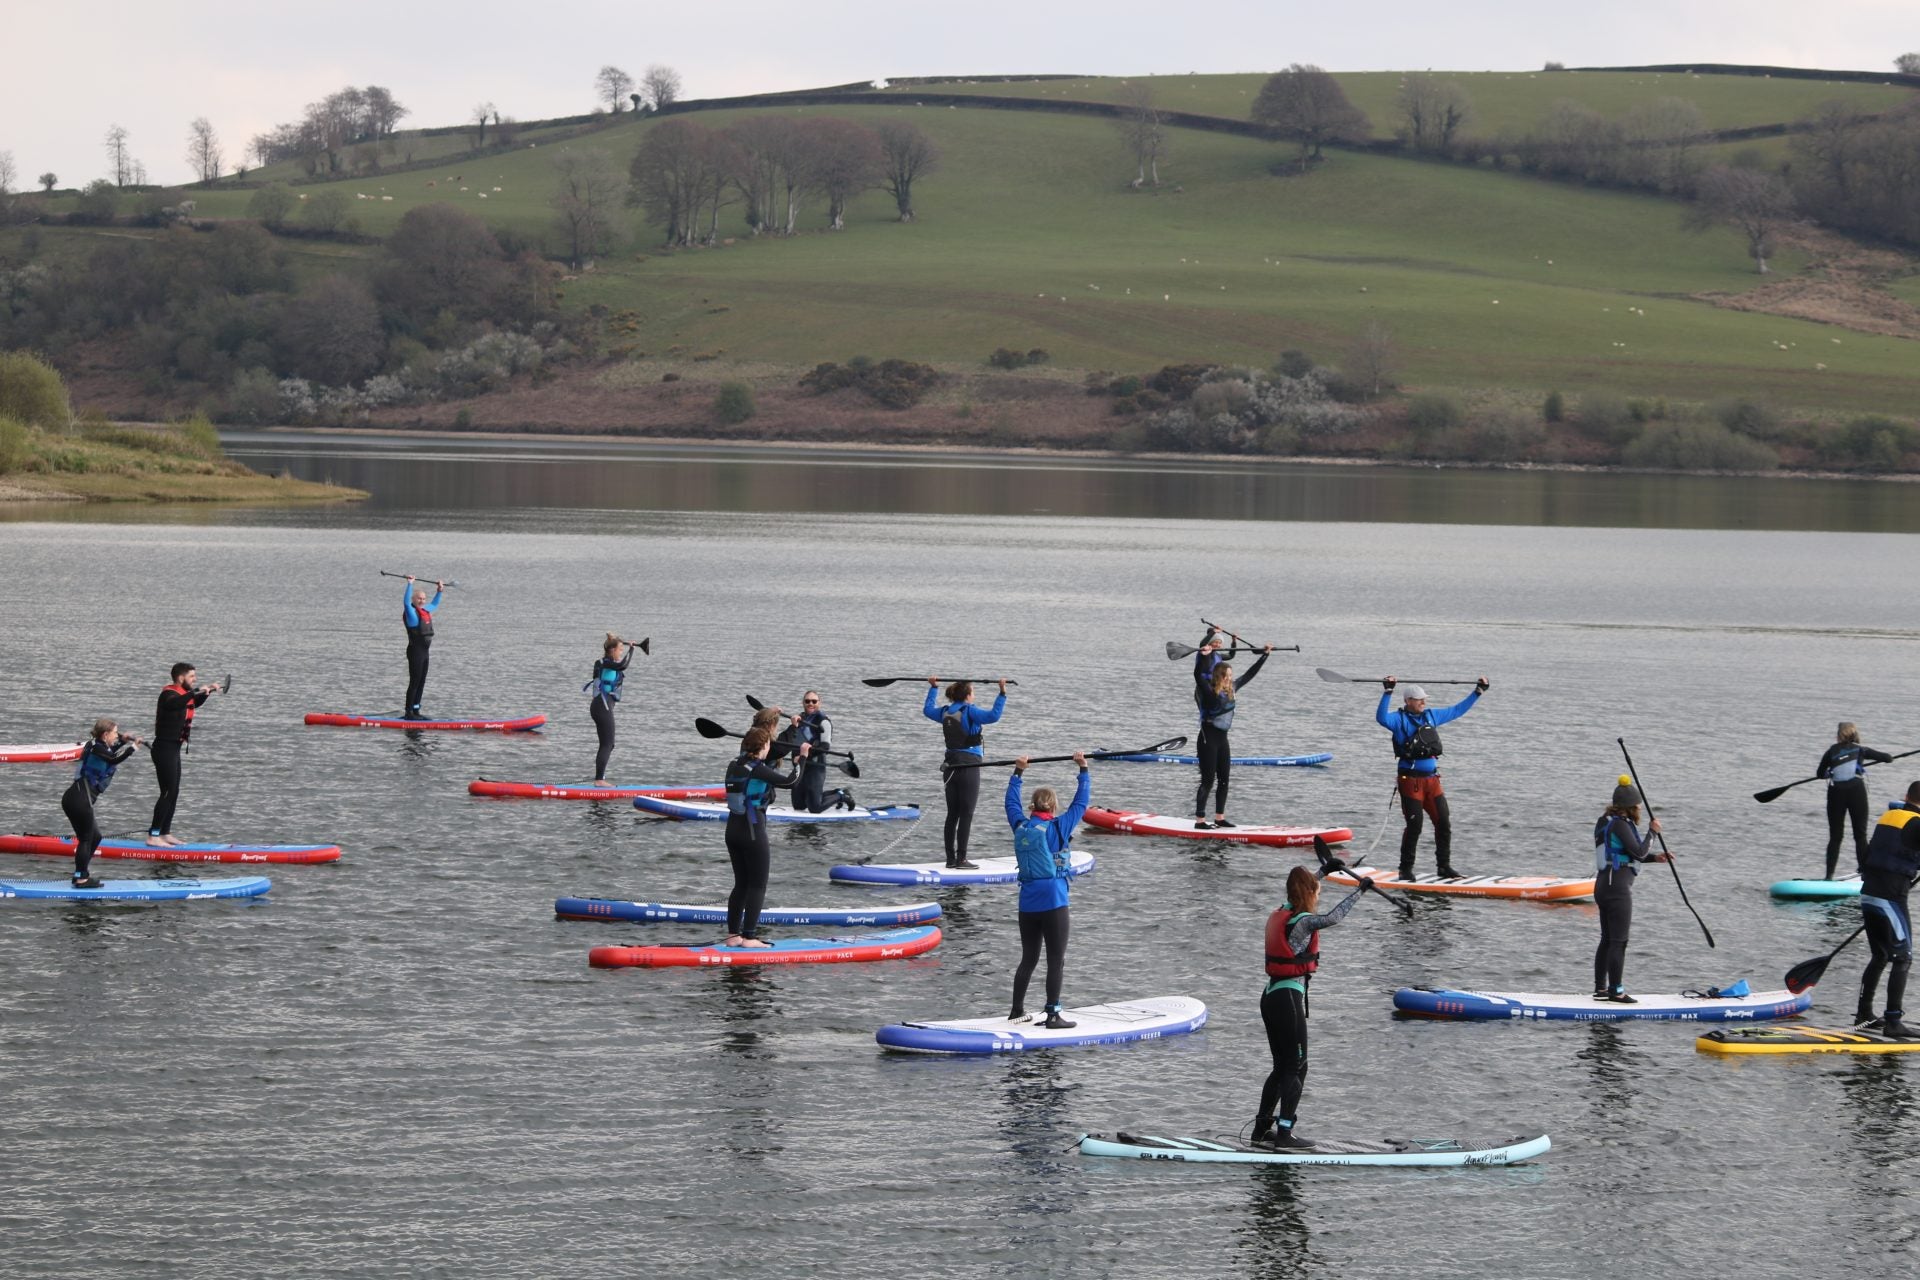 A group of people on Aquaplanet Paddle Boards holding paddles up